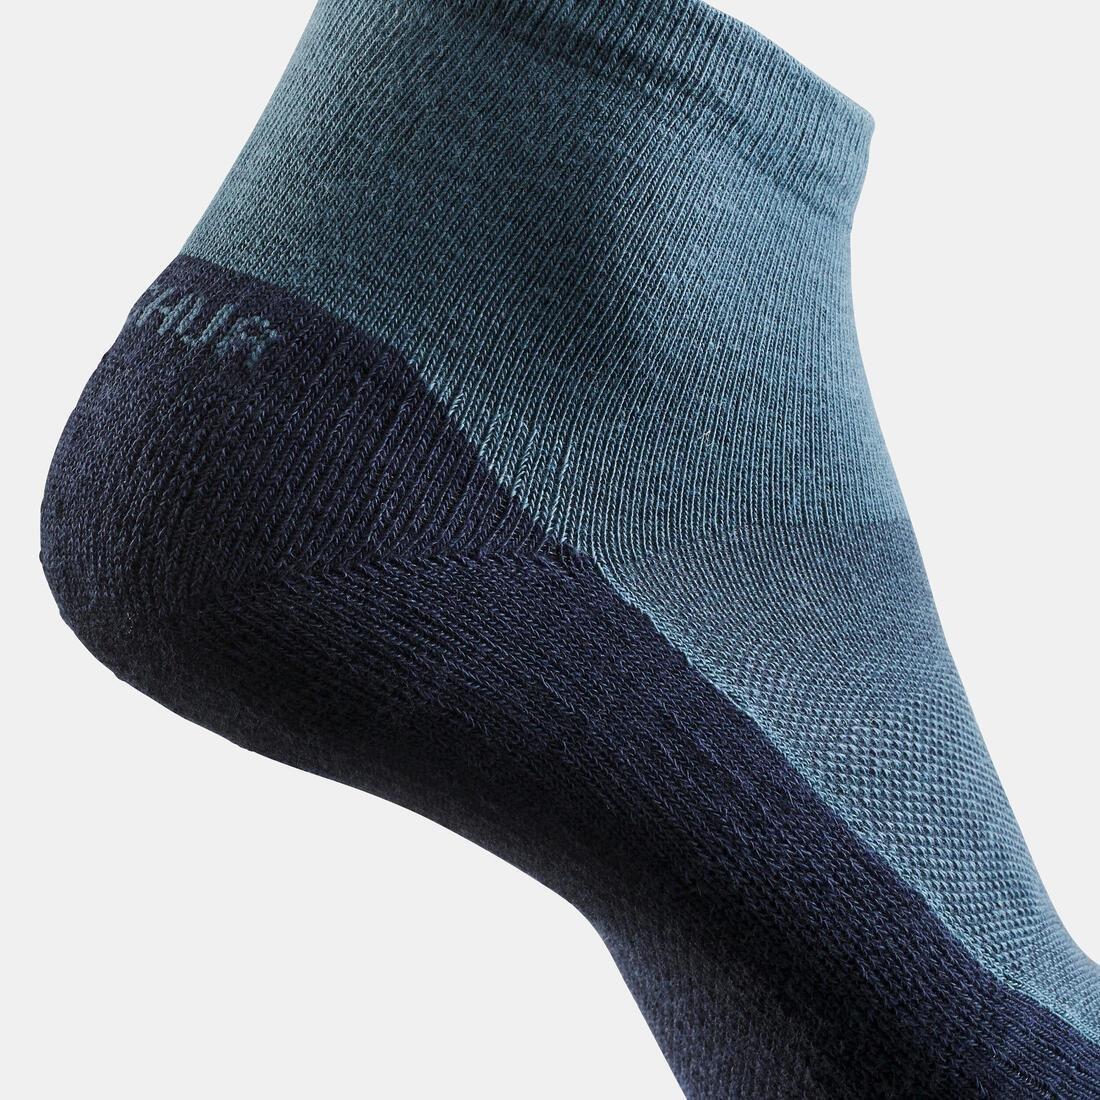 QUECHUA - Sock Hike 50 Mid - Pack Of 2 Pairs, Grey